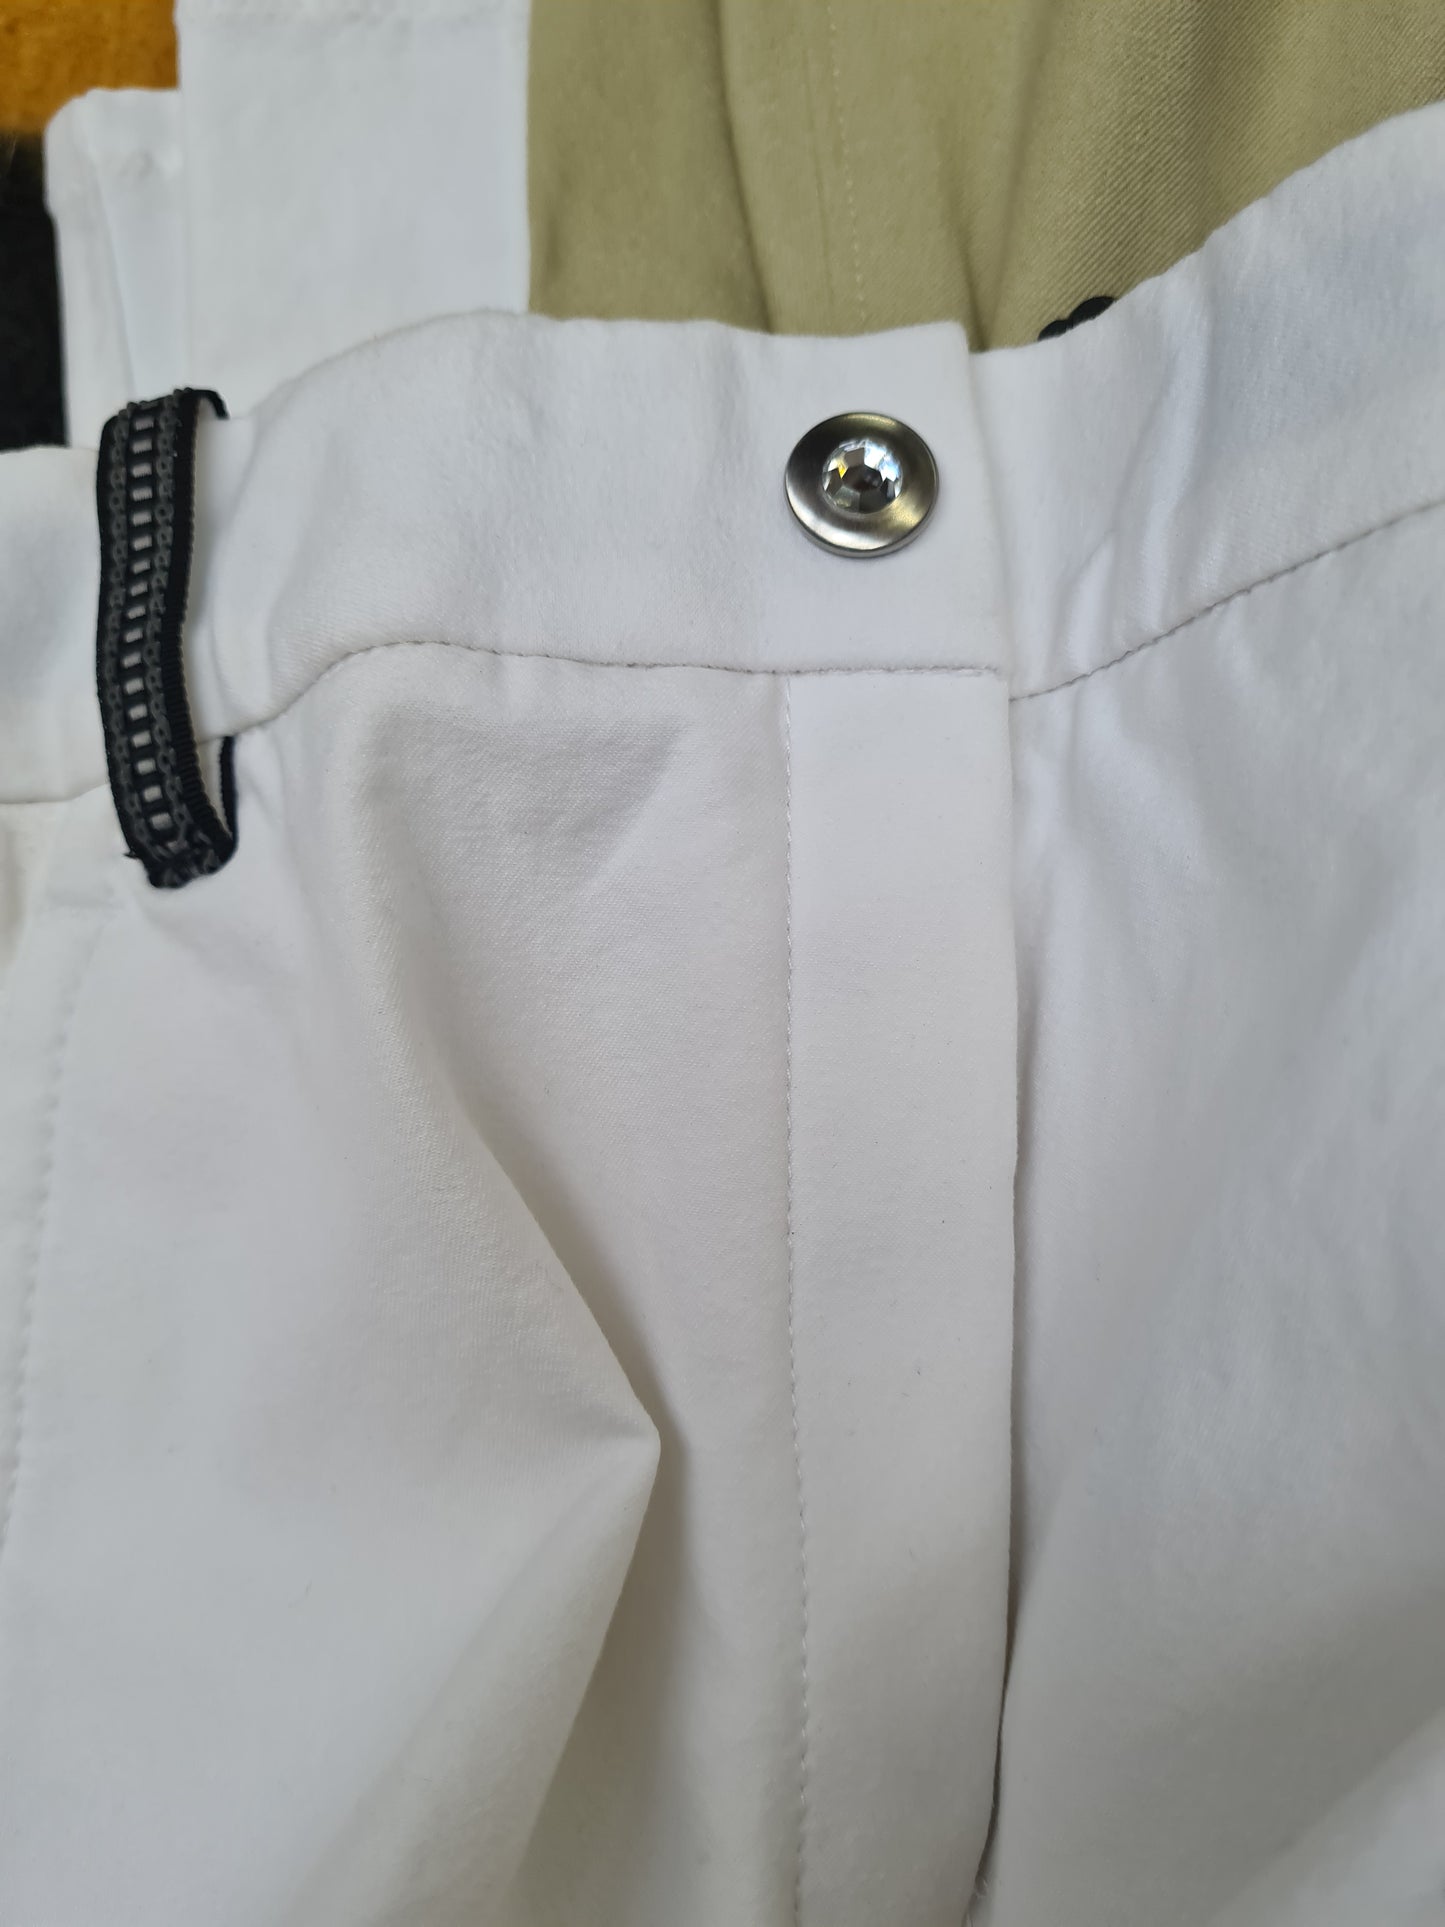 New size 8 Horseware Platinum Collection white breeches FREE POSTAGE☆